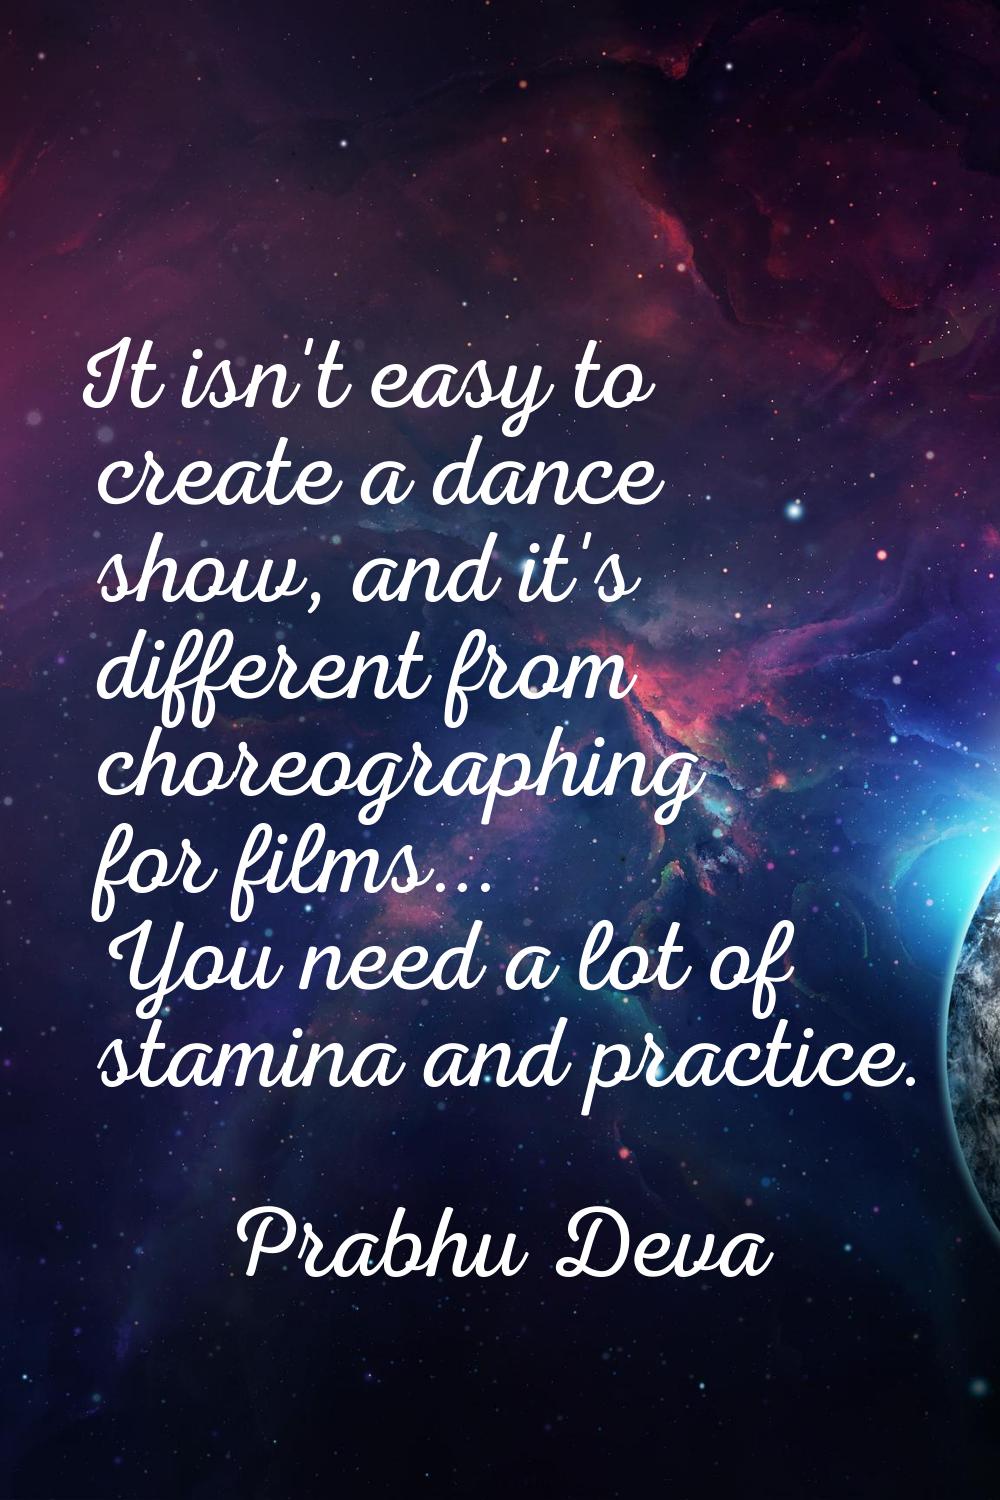 It isn't easy to create a dance show, and it's different from choreographing for films... You need 